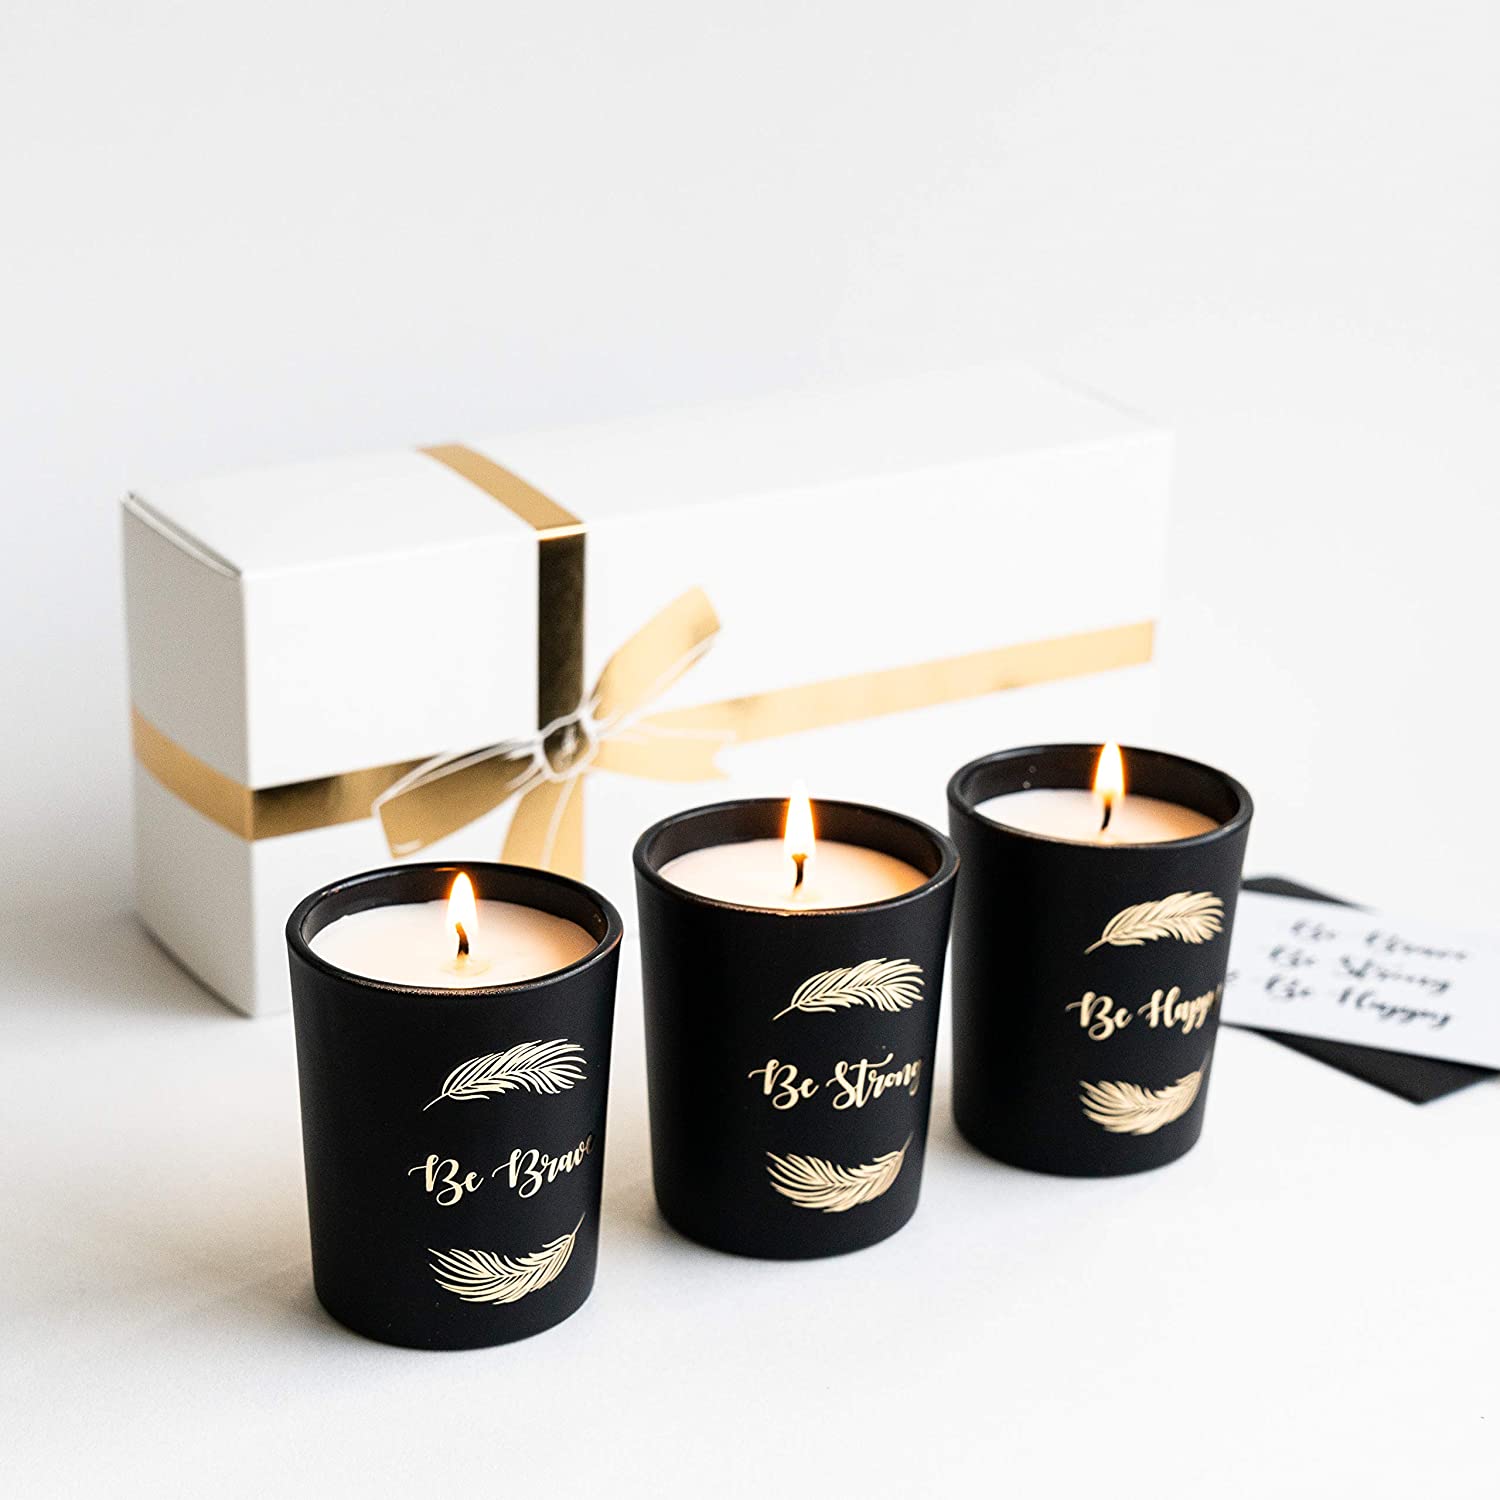 Housewarming gift ideas for couples - candle set